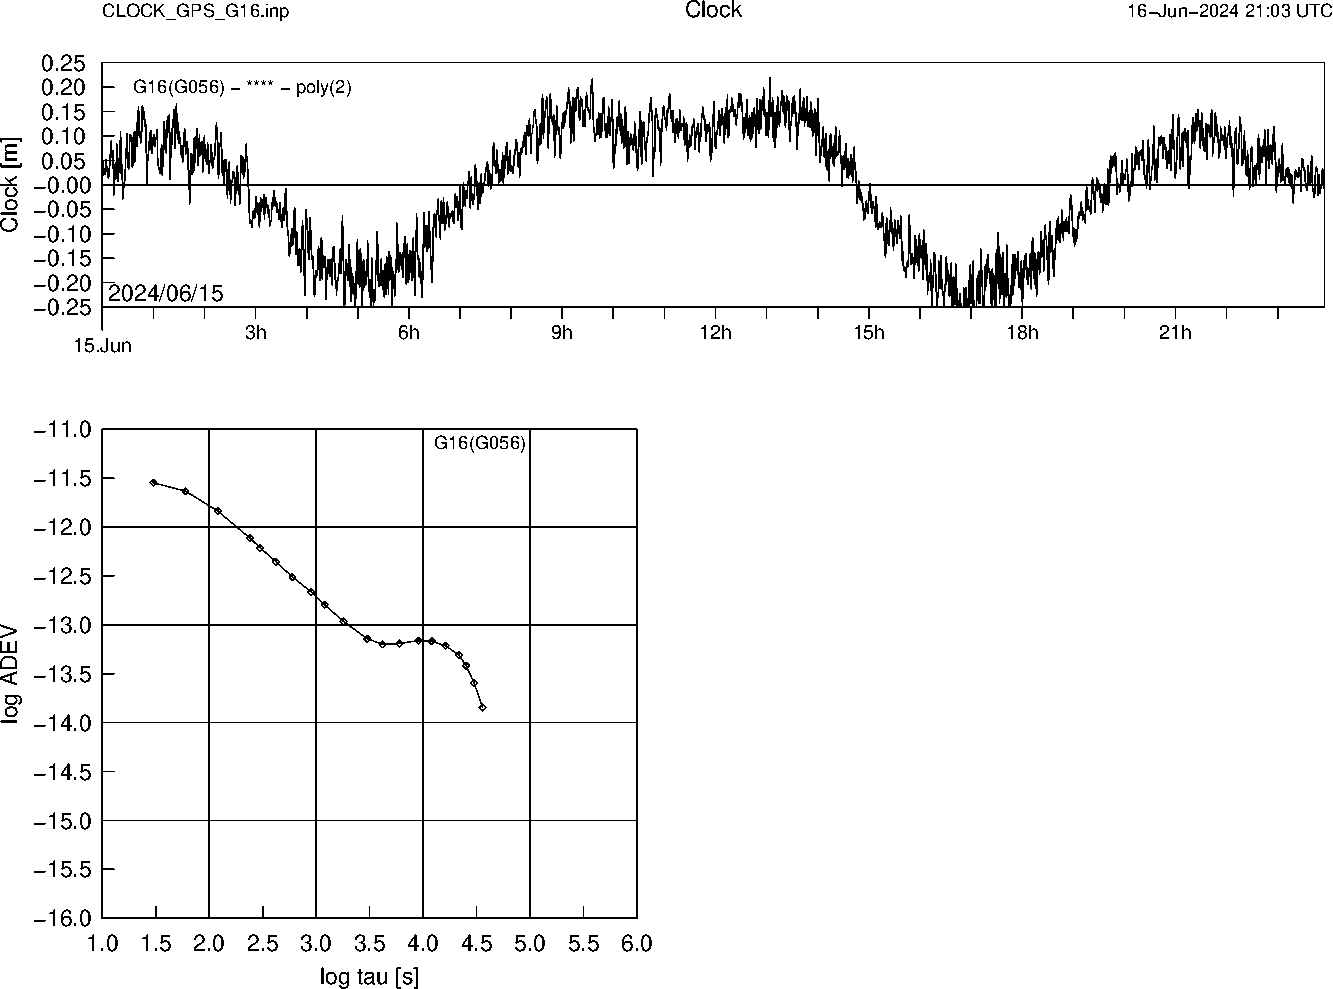 GPS G16 Clock Time Series and Allan Deviation